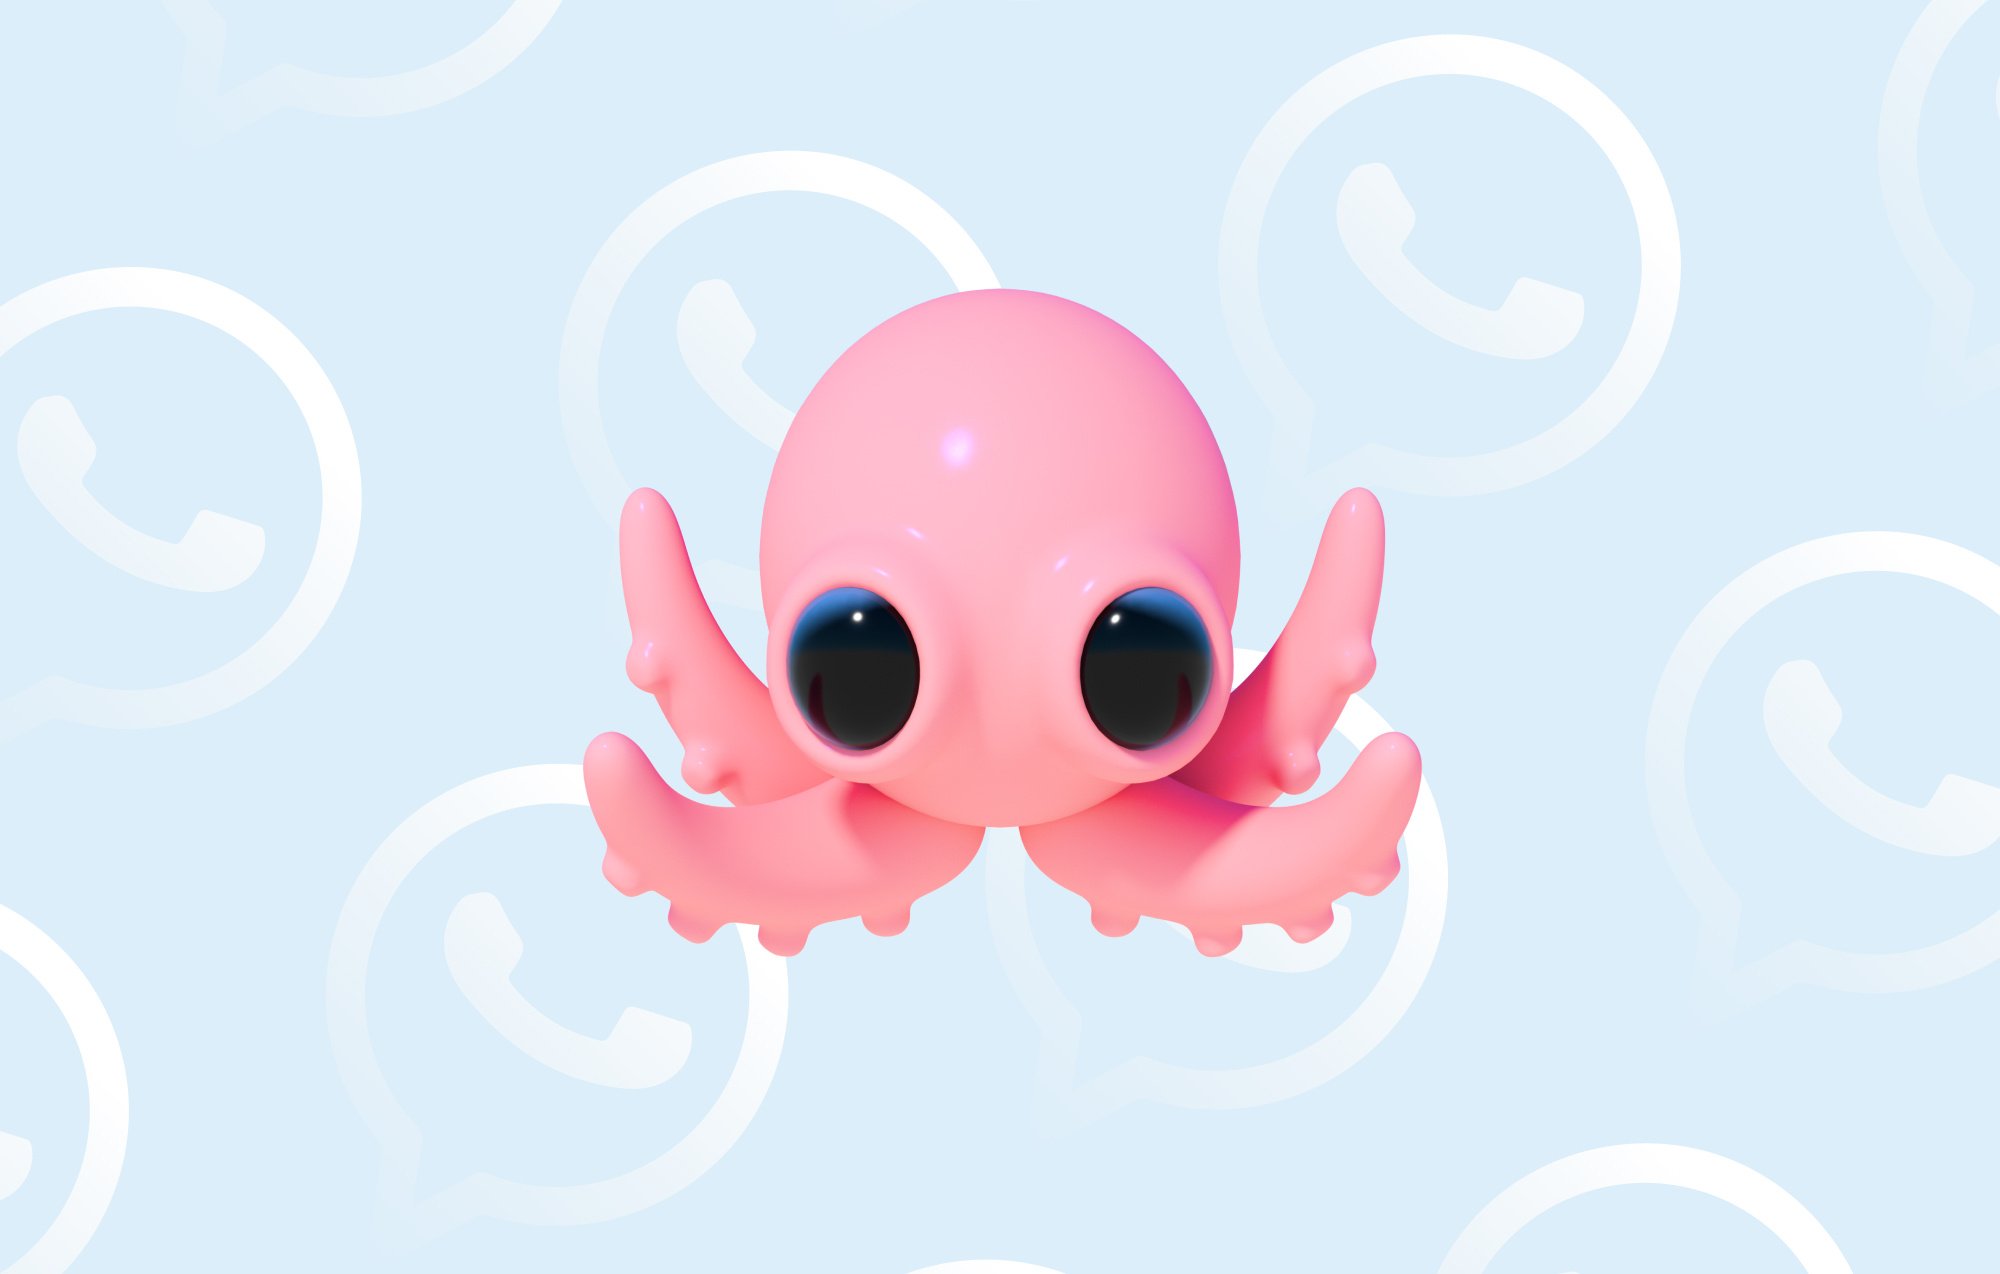 Pink octopus for WhatsApp omnnichannel strategy article charles 